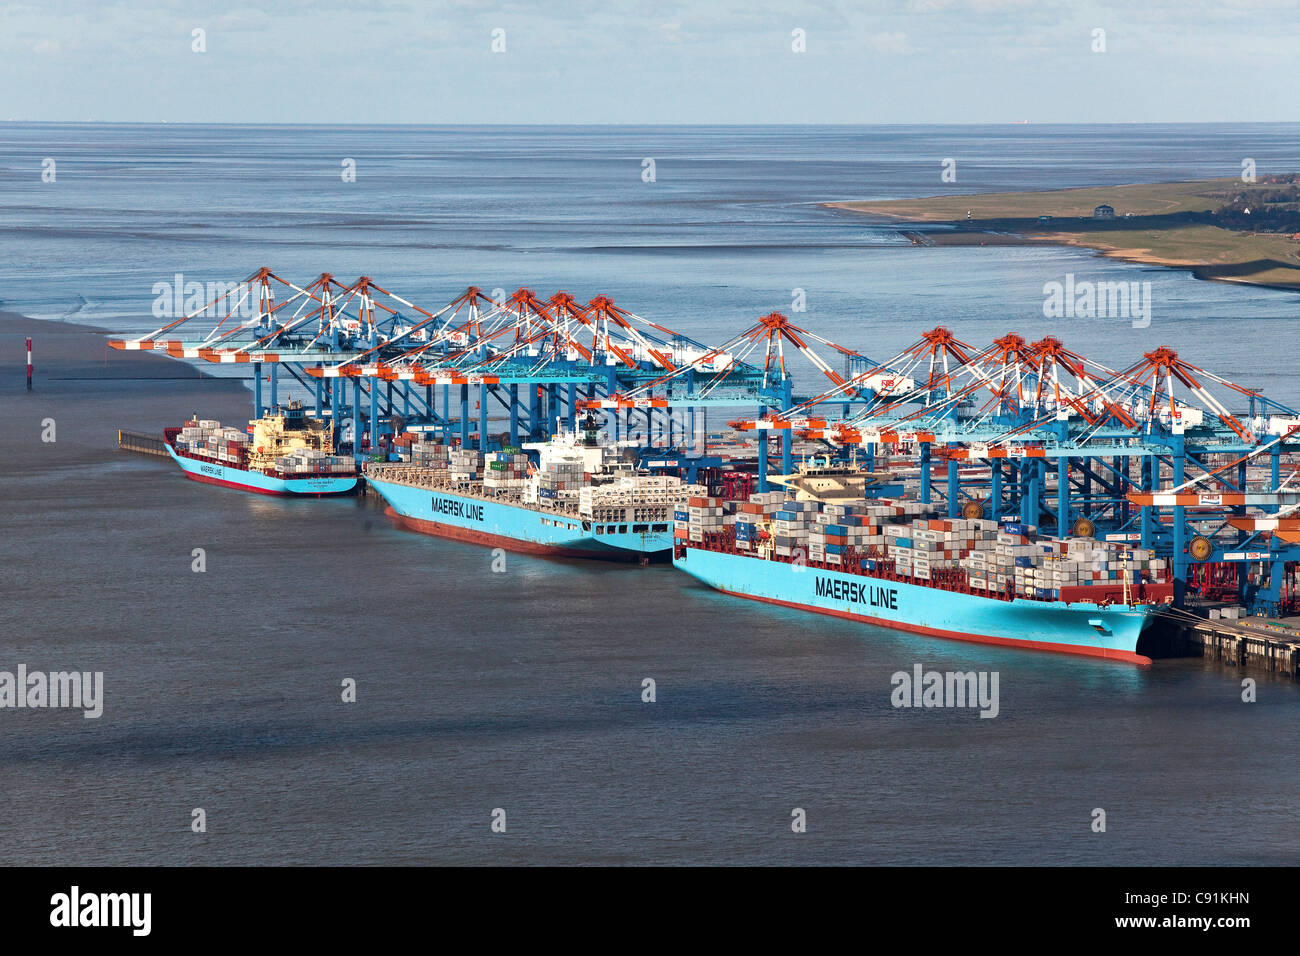 Aerial view of the container port with loading cranes and container ships, terminal, Bremerhaven, Bremen, Germany Stock Photo